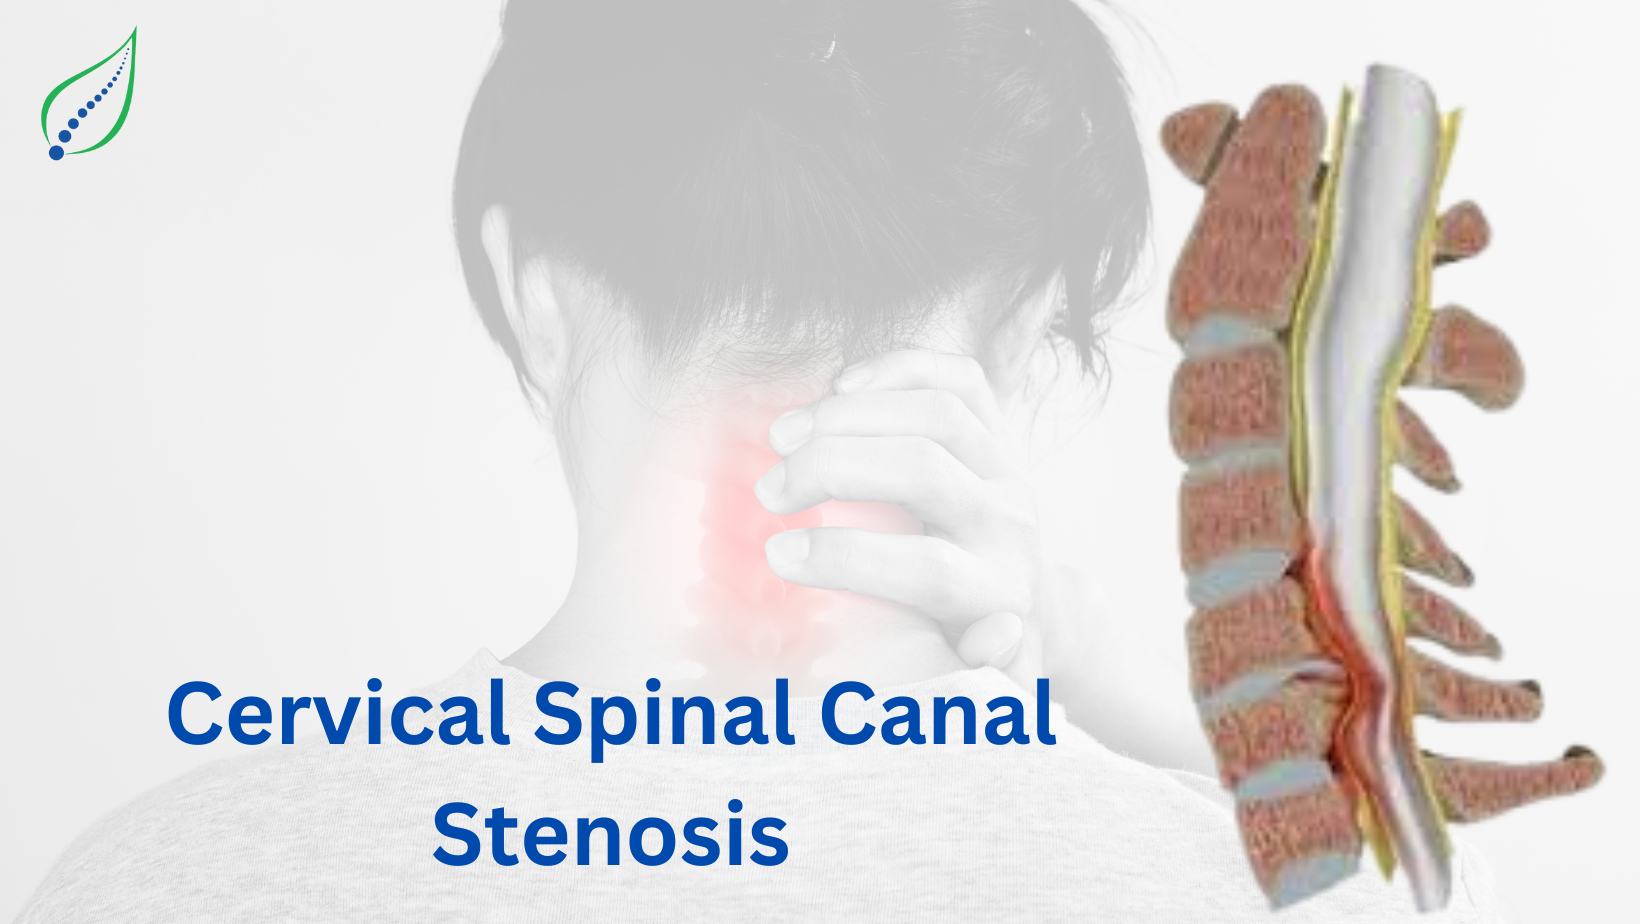 Cervical Spinal Canal Stenosis